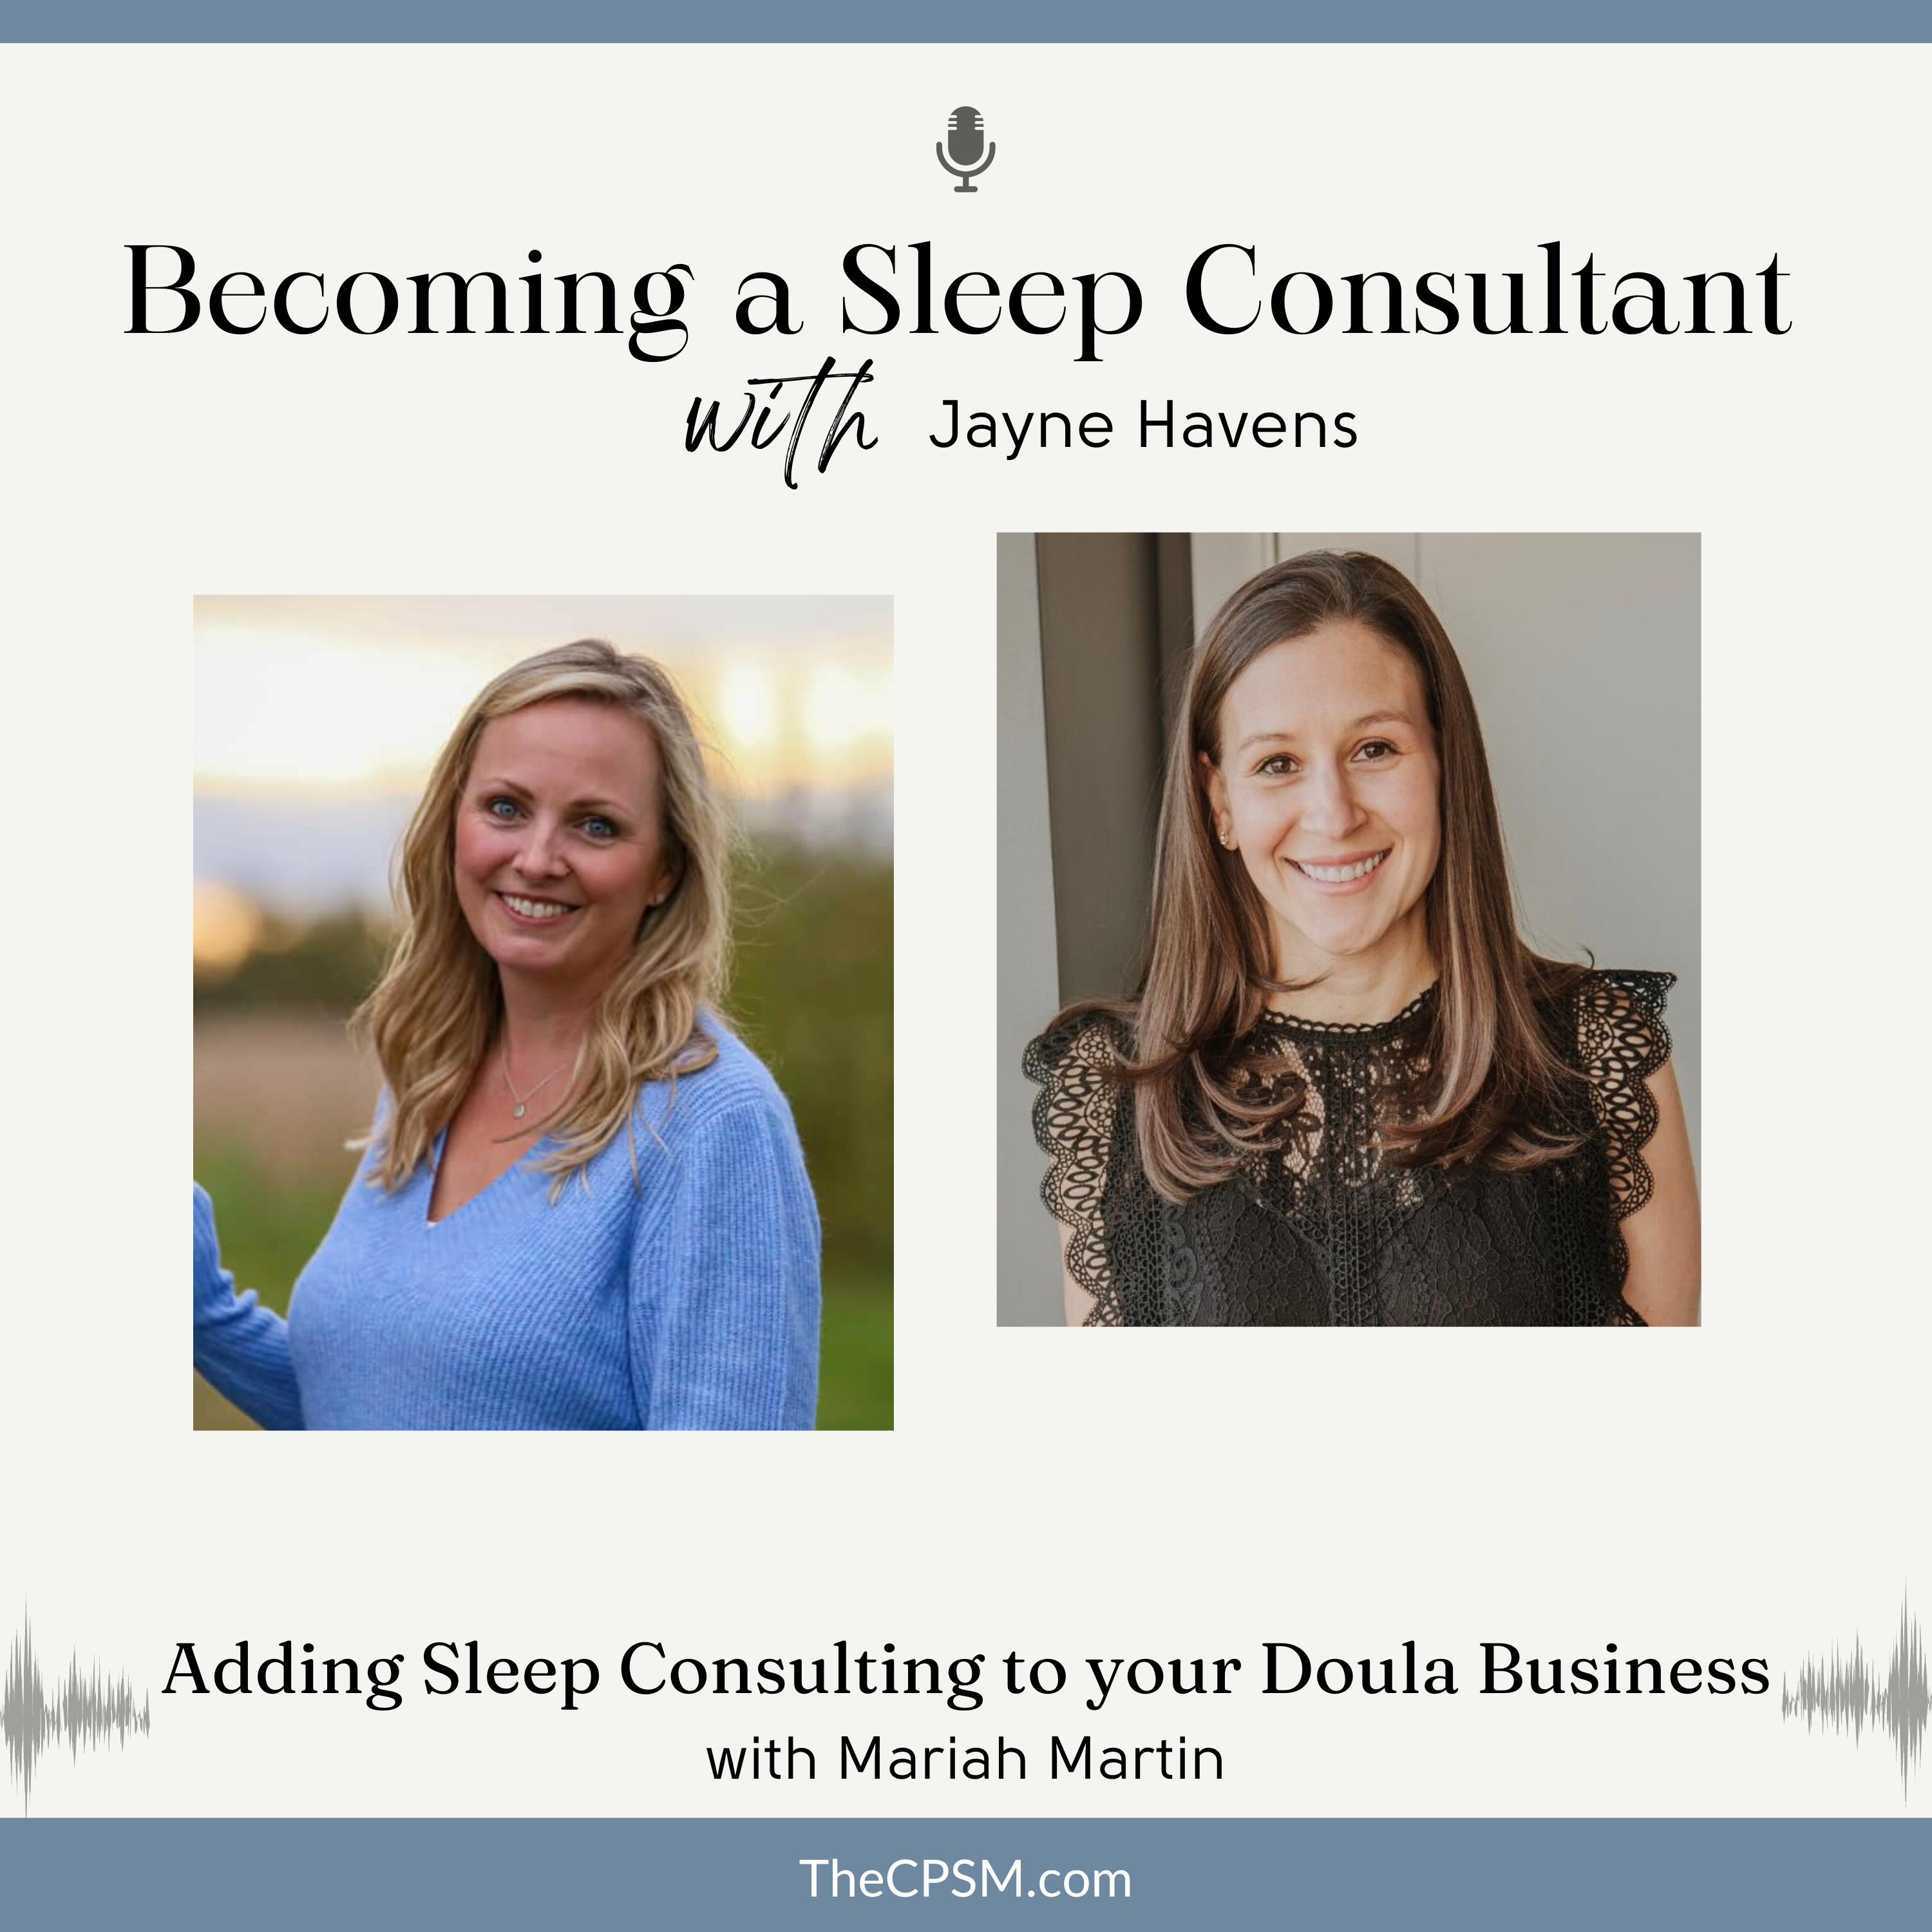 Adding Sleep Consulting to your Postpartum Doula Business with Mariah Martin